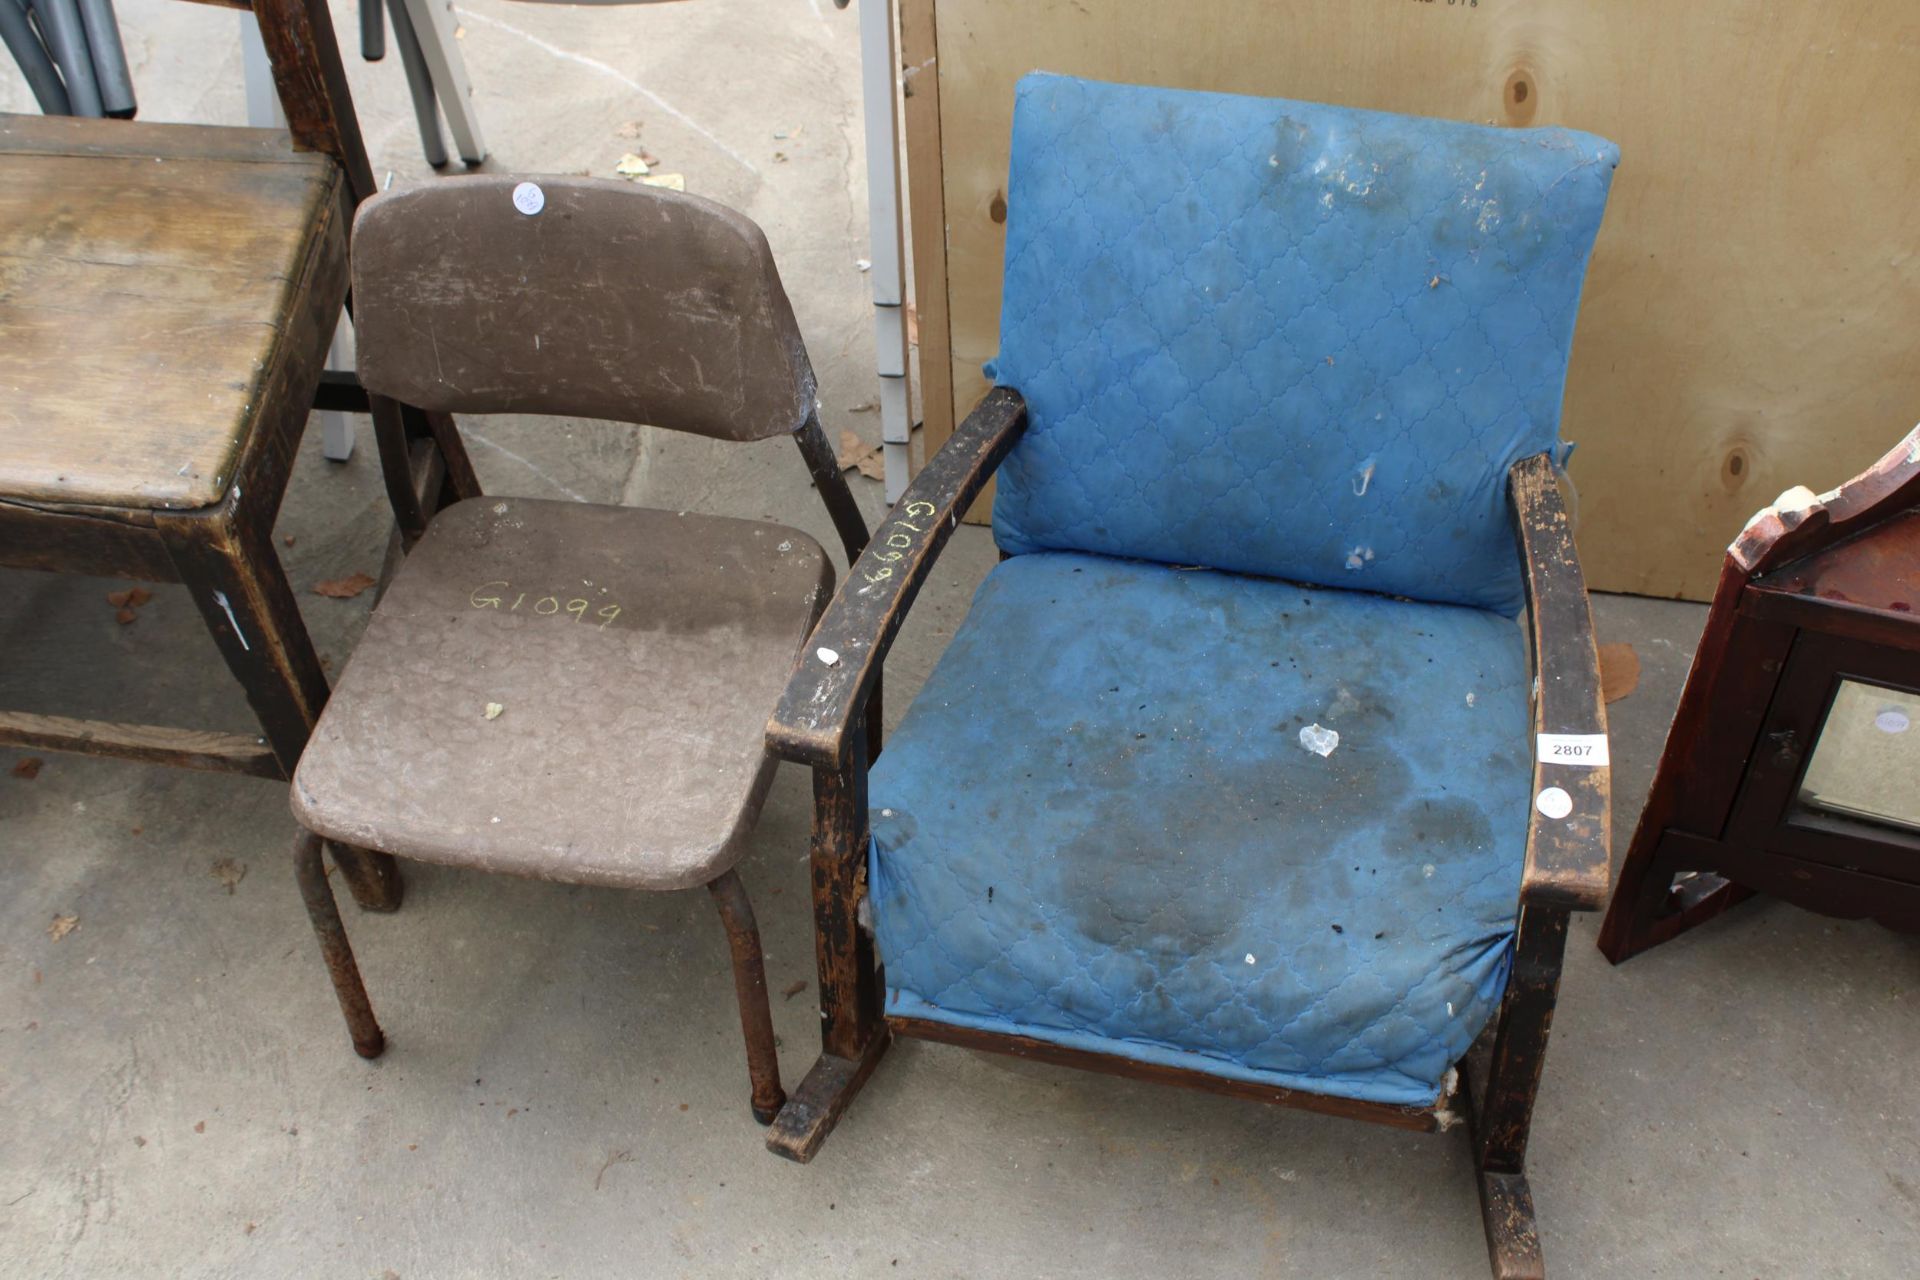 A MID 20TH CENTURY CHILDS ROCKING CHAIR AND COUNTIES FURNITURE GROUP CHILDS PLASTIC CHAIR